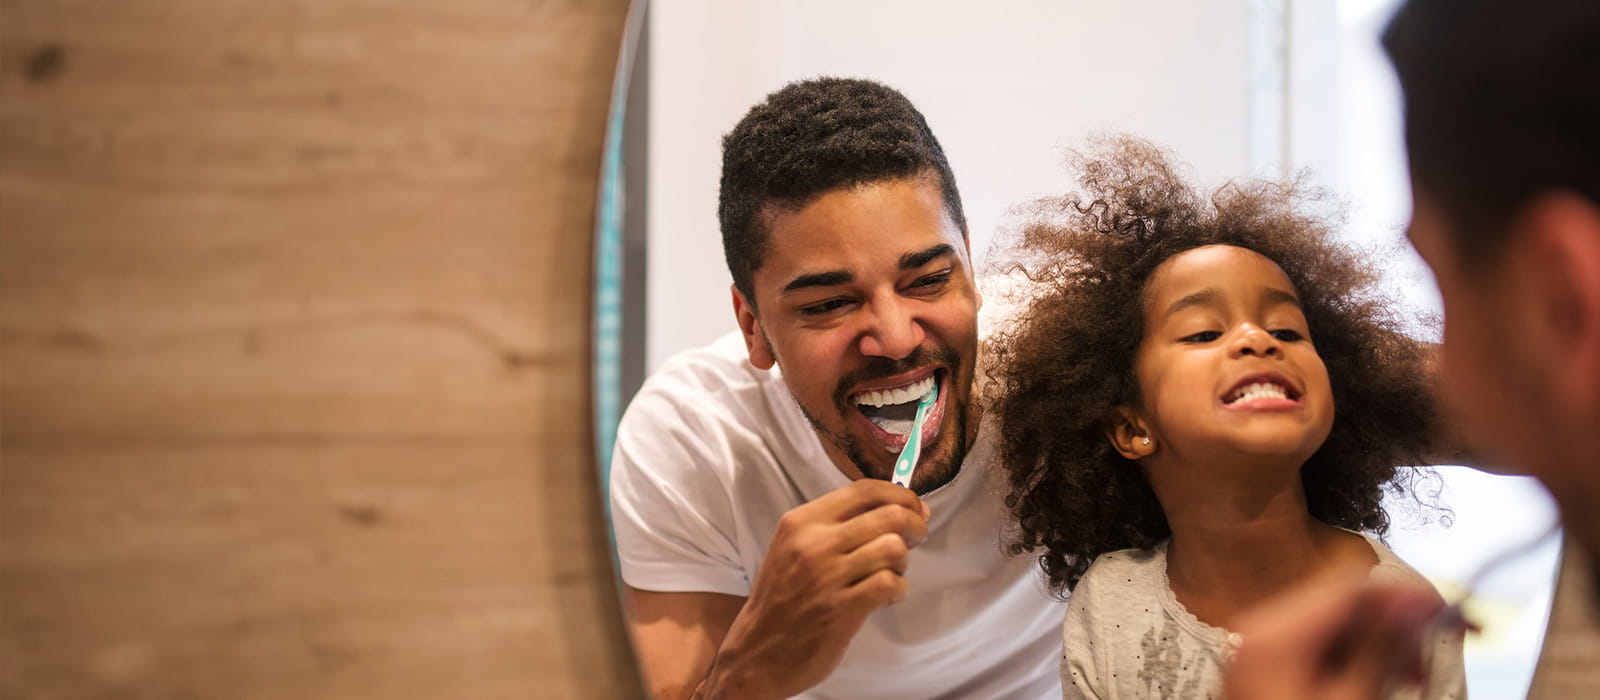 Father and daughter laughing while brushing their teeth together.